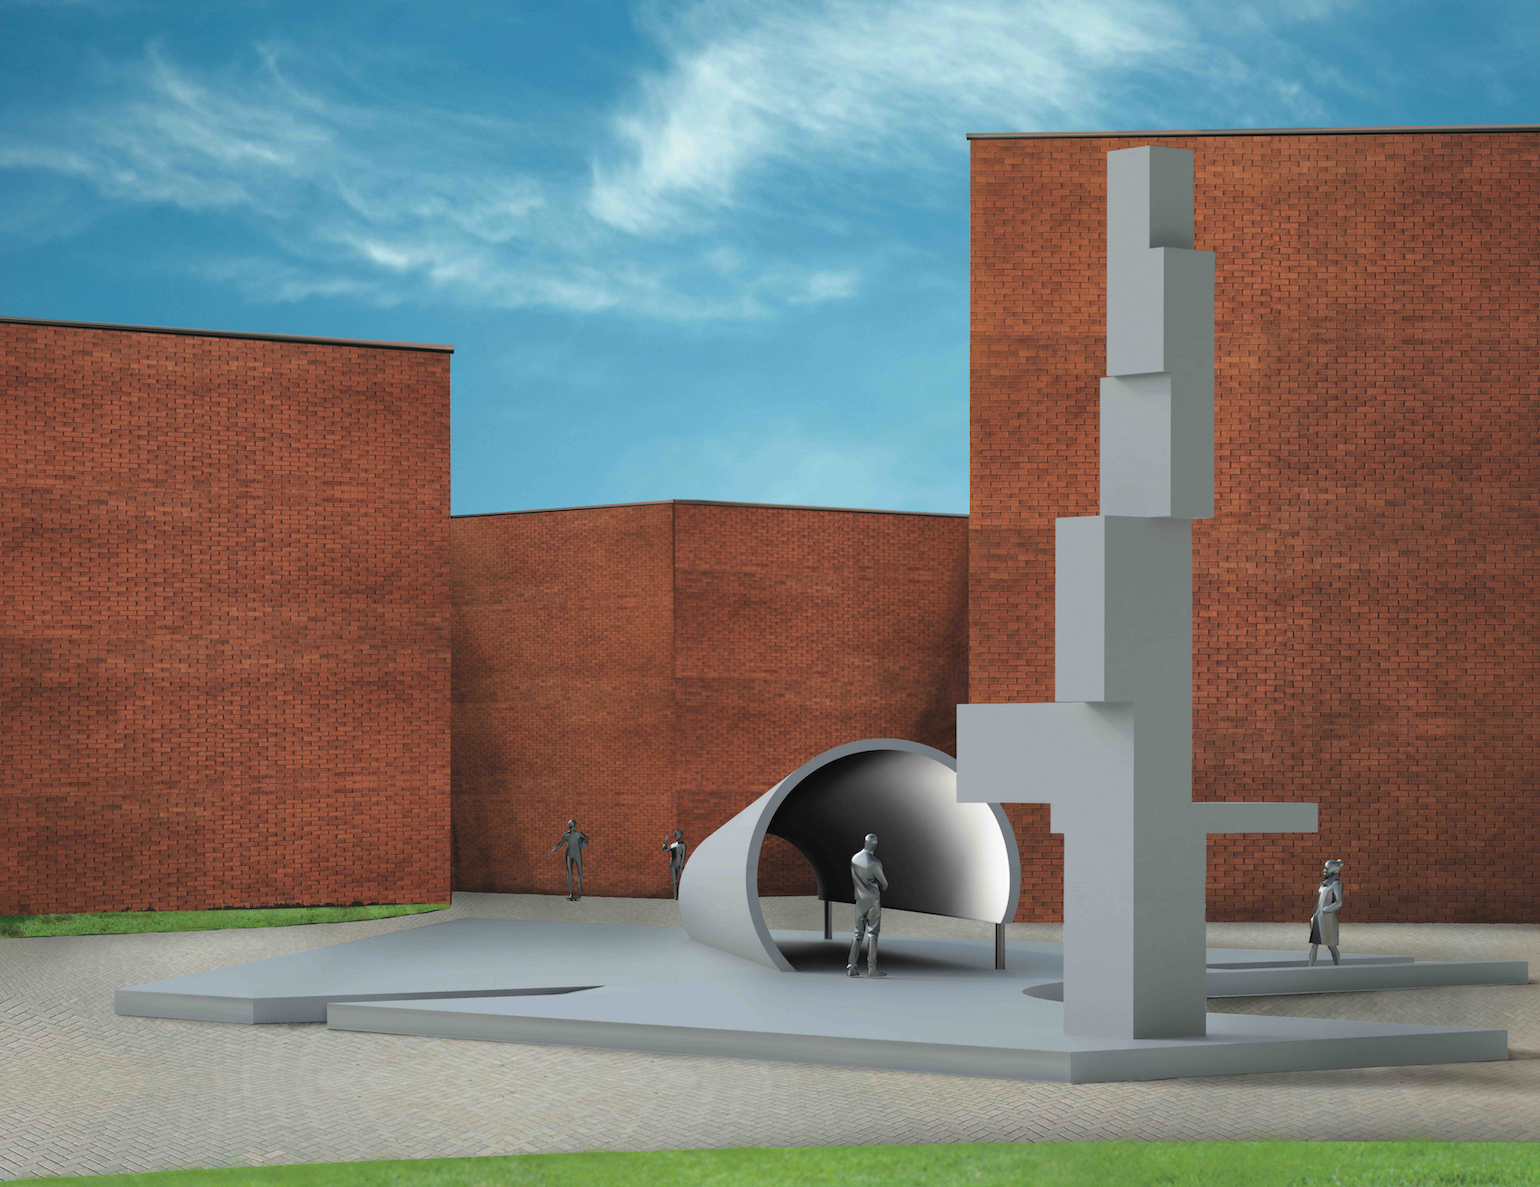 An outdoor space with a geometric sculpture, a cylindrical pavilion, and figures against a backdrop of brick walls and blue sky.